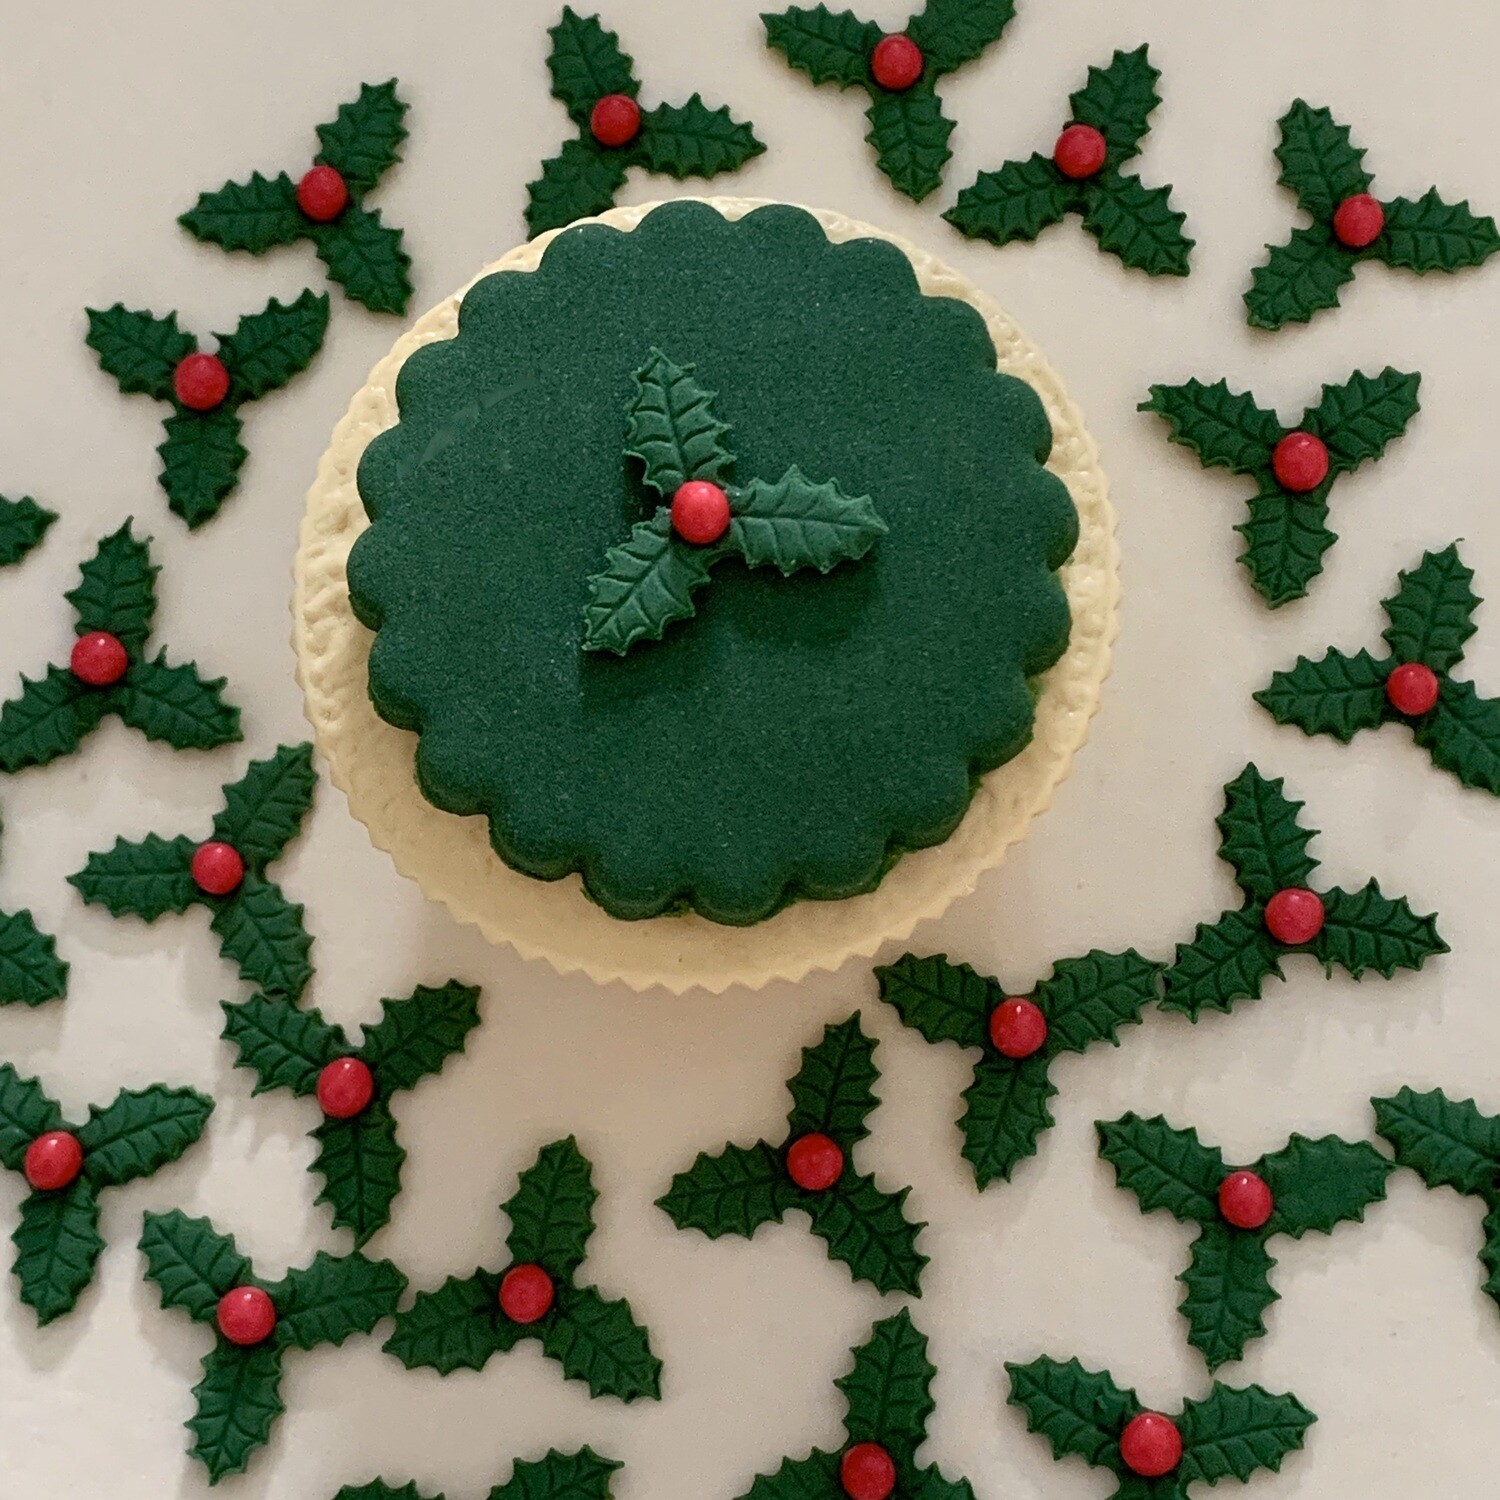 Green Petits Four Holly